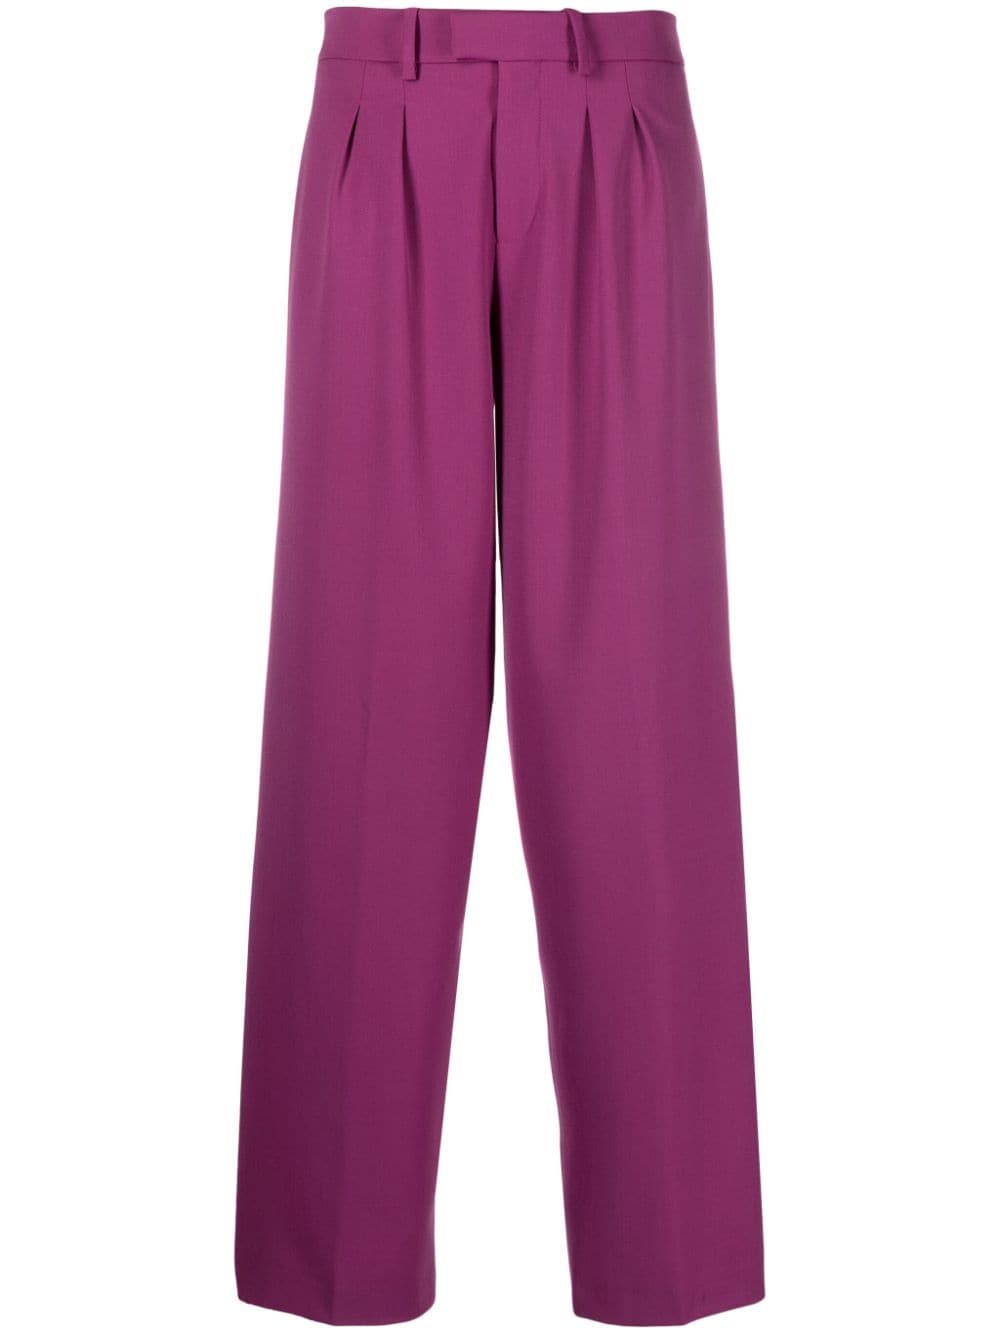 FEDERICA TOSI MID-RISE TAILORED PALAZZO TROUSERS